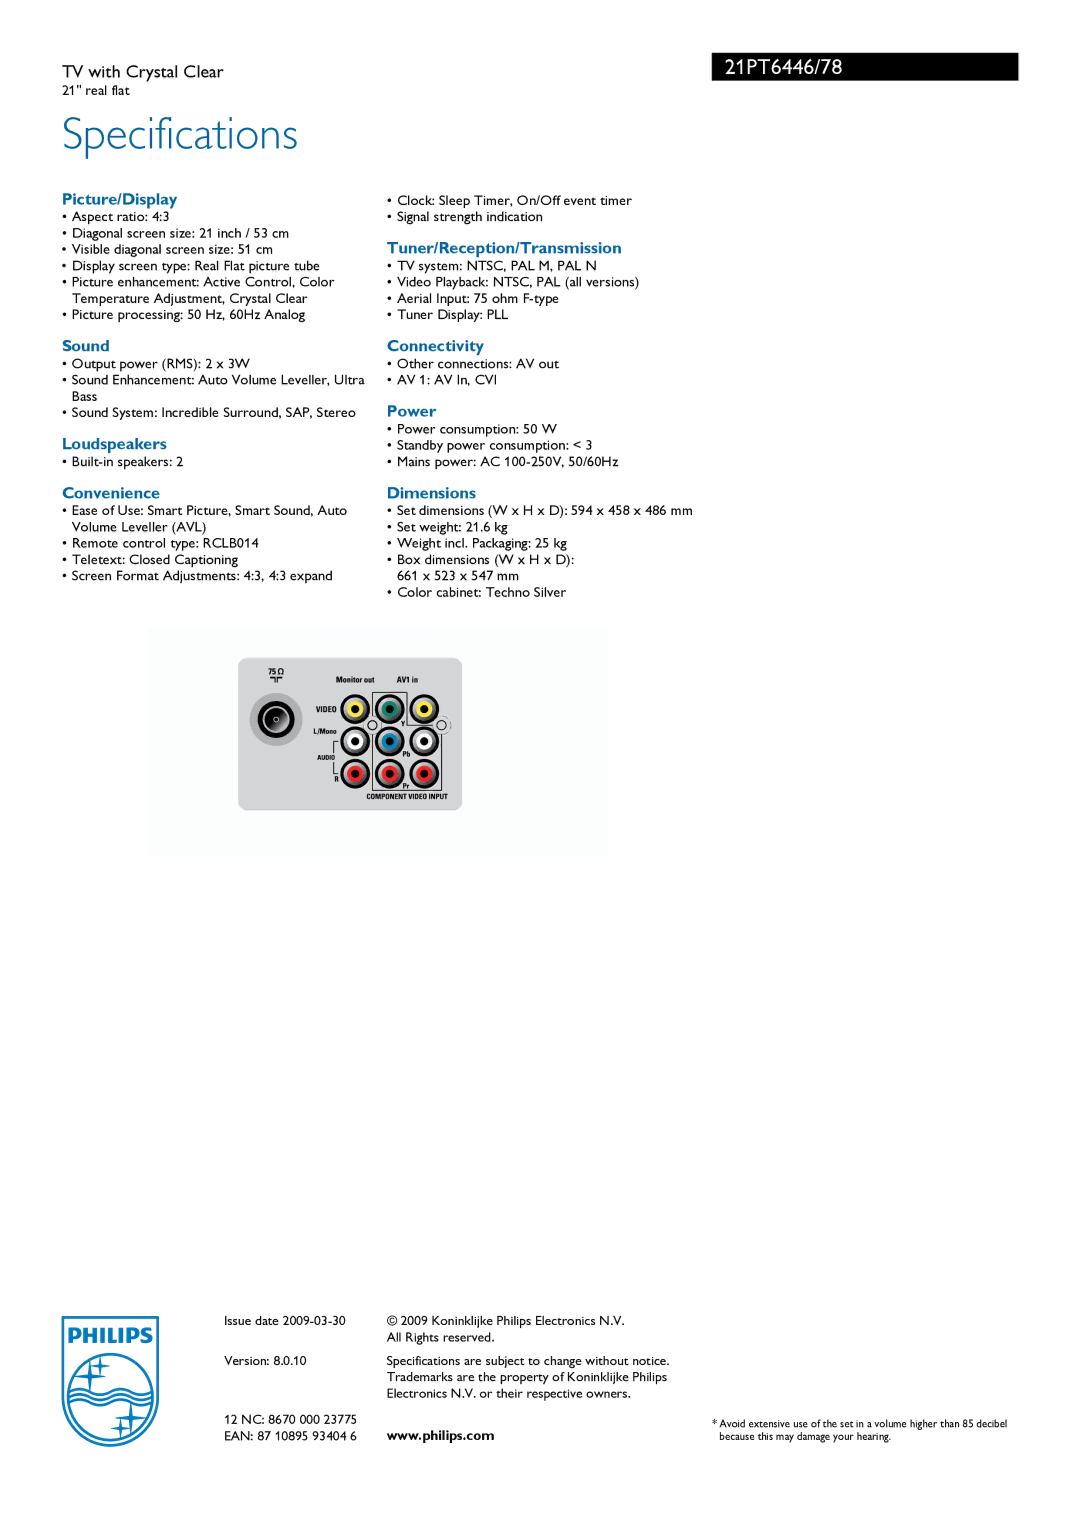 Philips 21PT6446/78 manual Specifications 